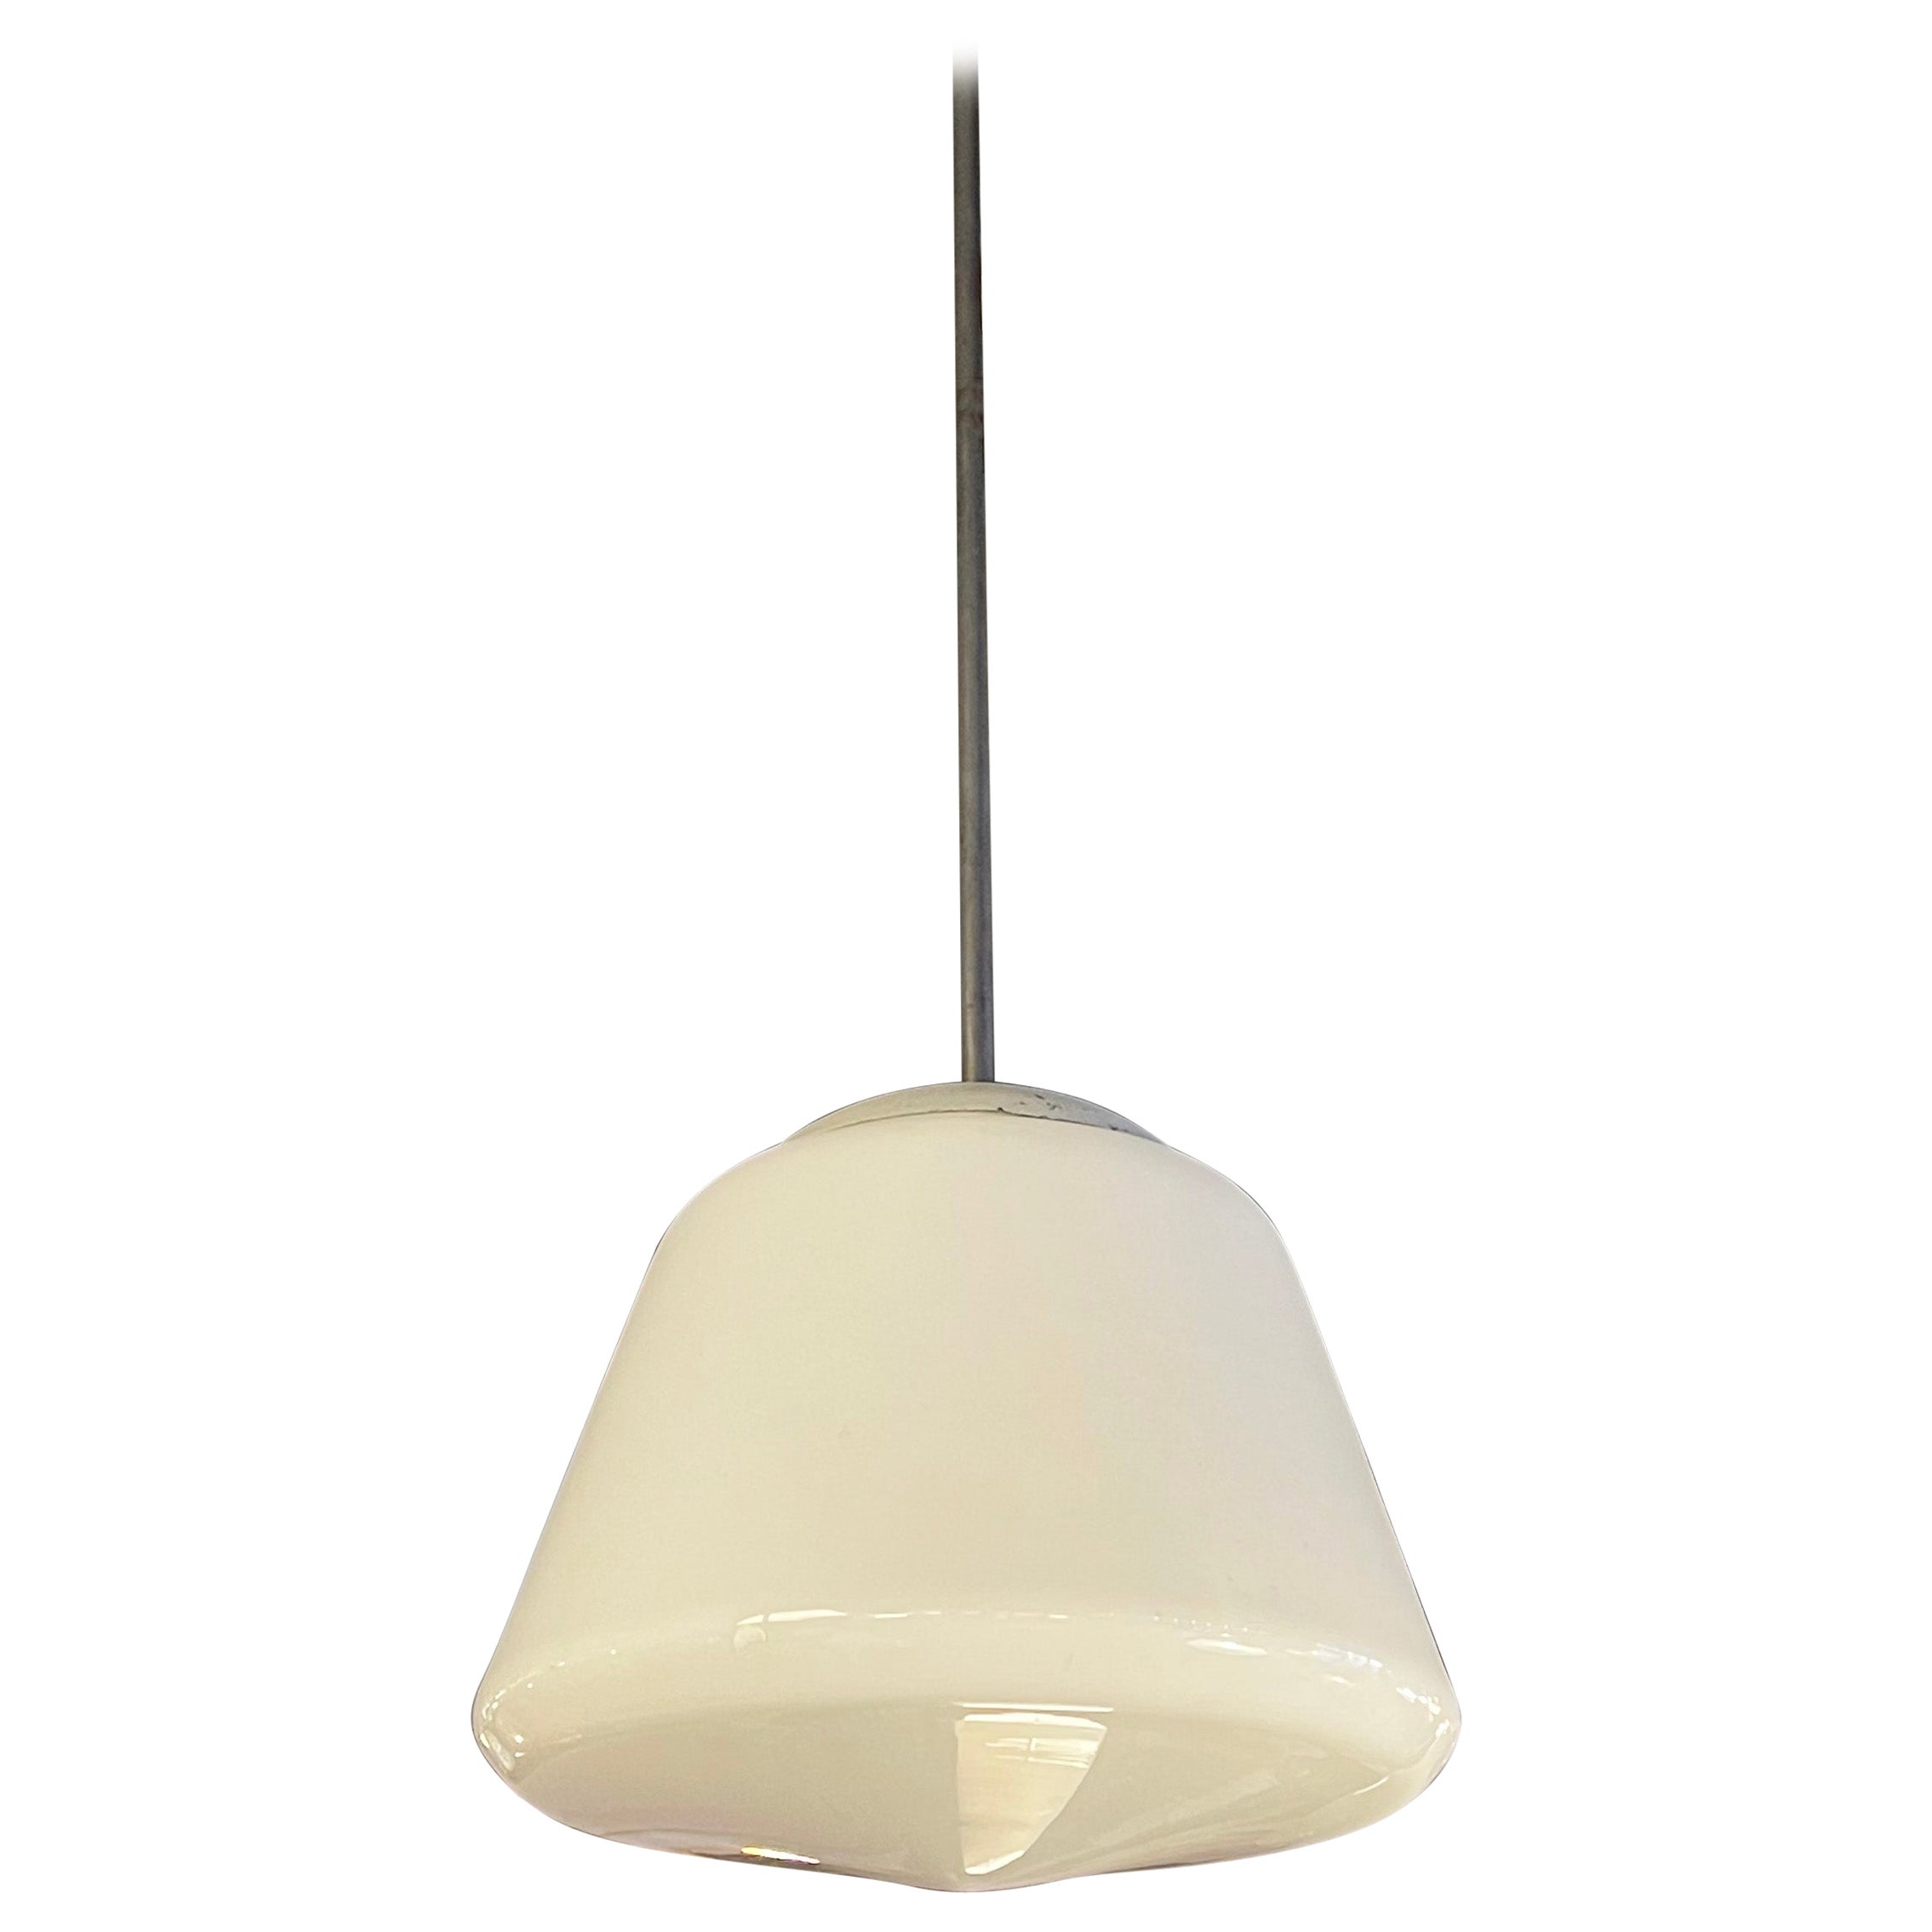 Large Conical Milk Glass Library Pendant Light - 5 Available